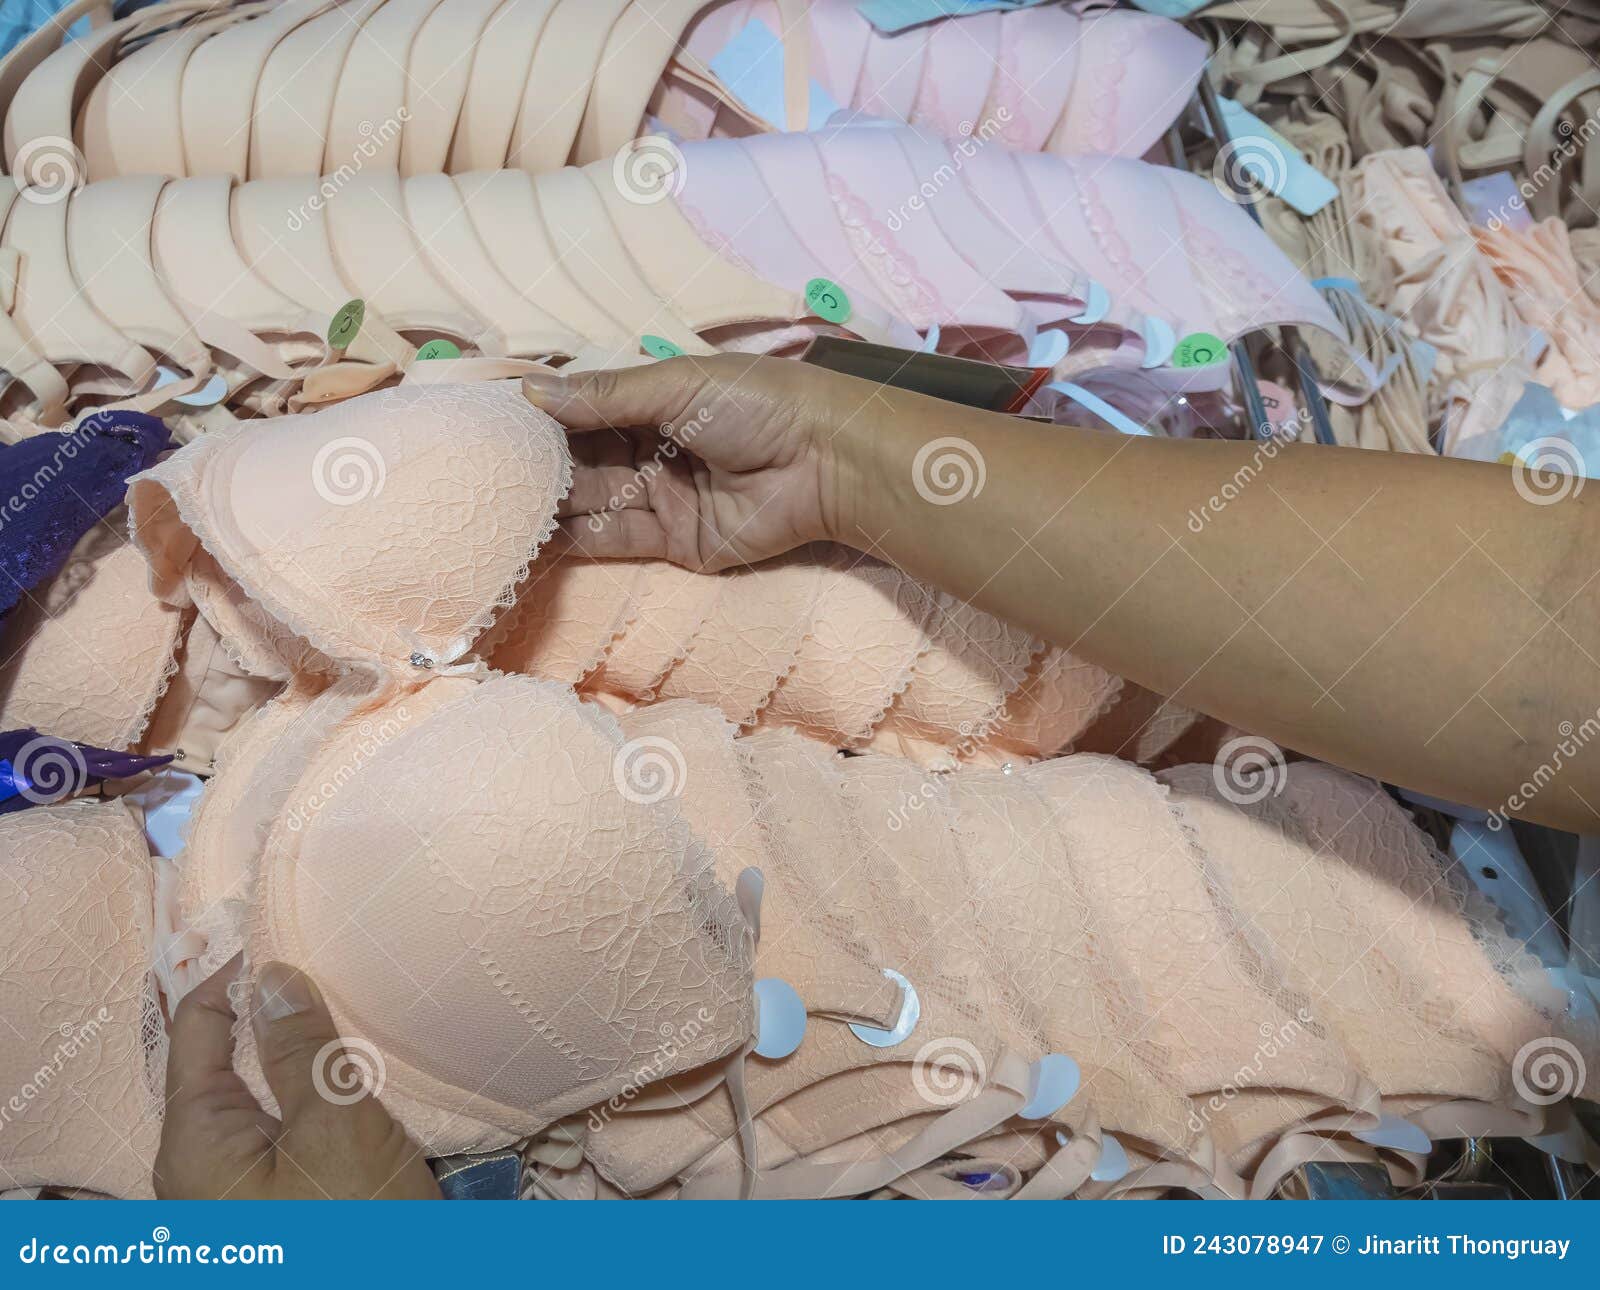 Hands of Mature Woman Choosing or Searching New Brassiere Cups